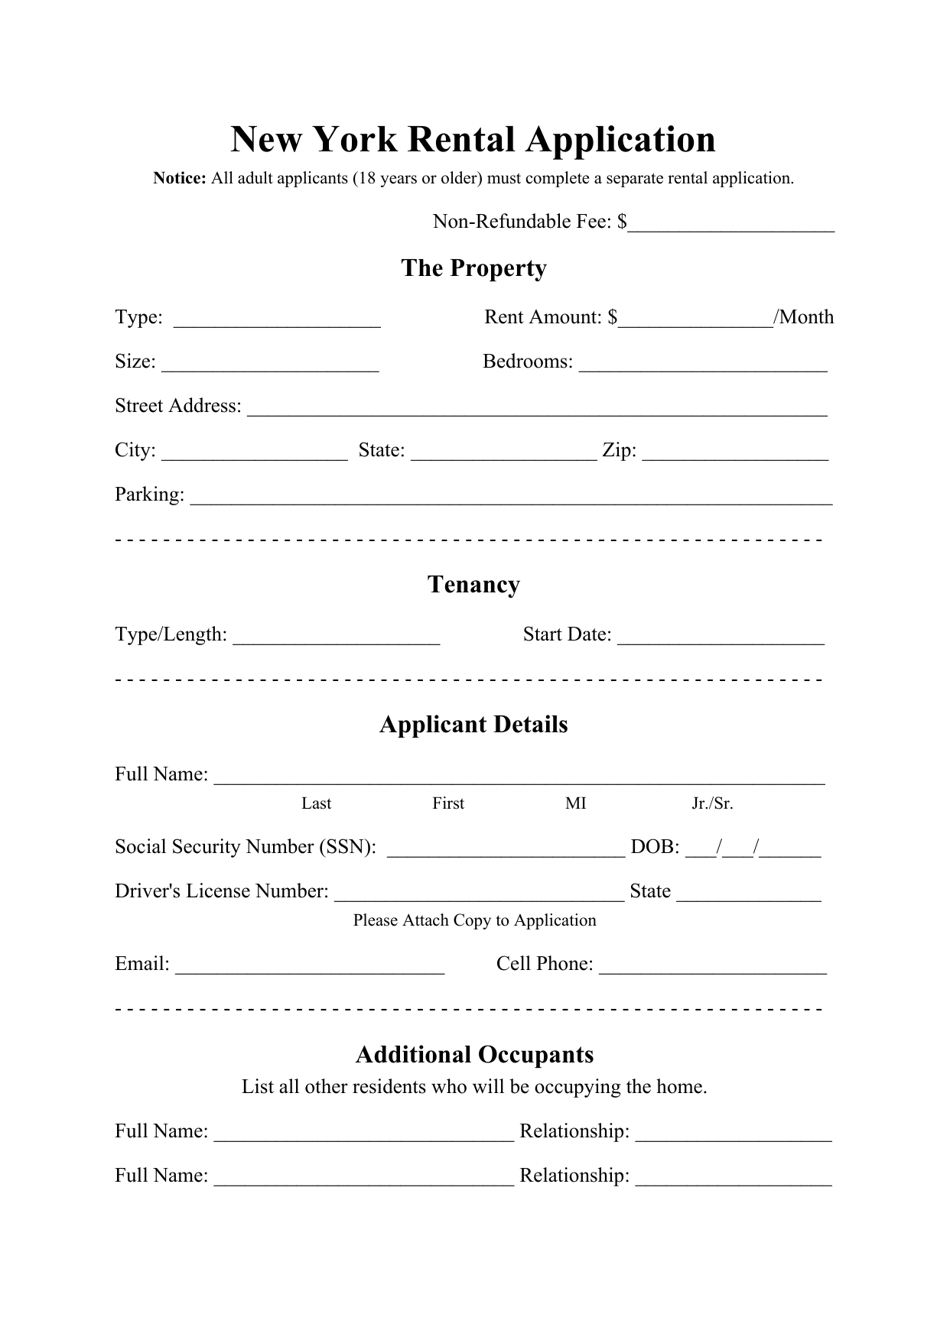 Rental Application Form - New York, Page 1